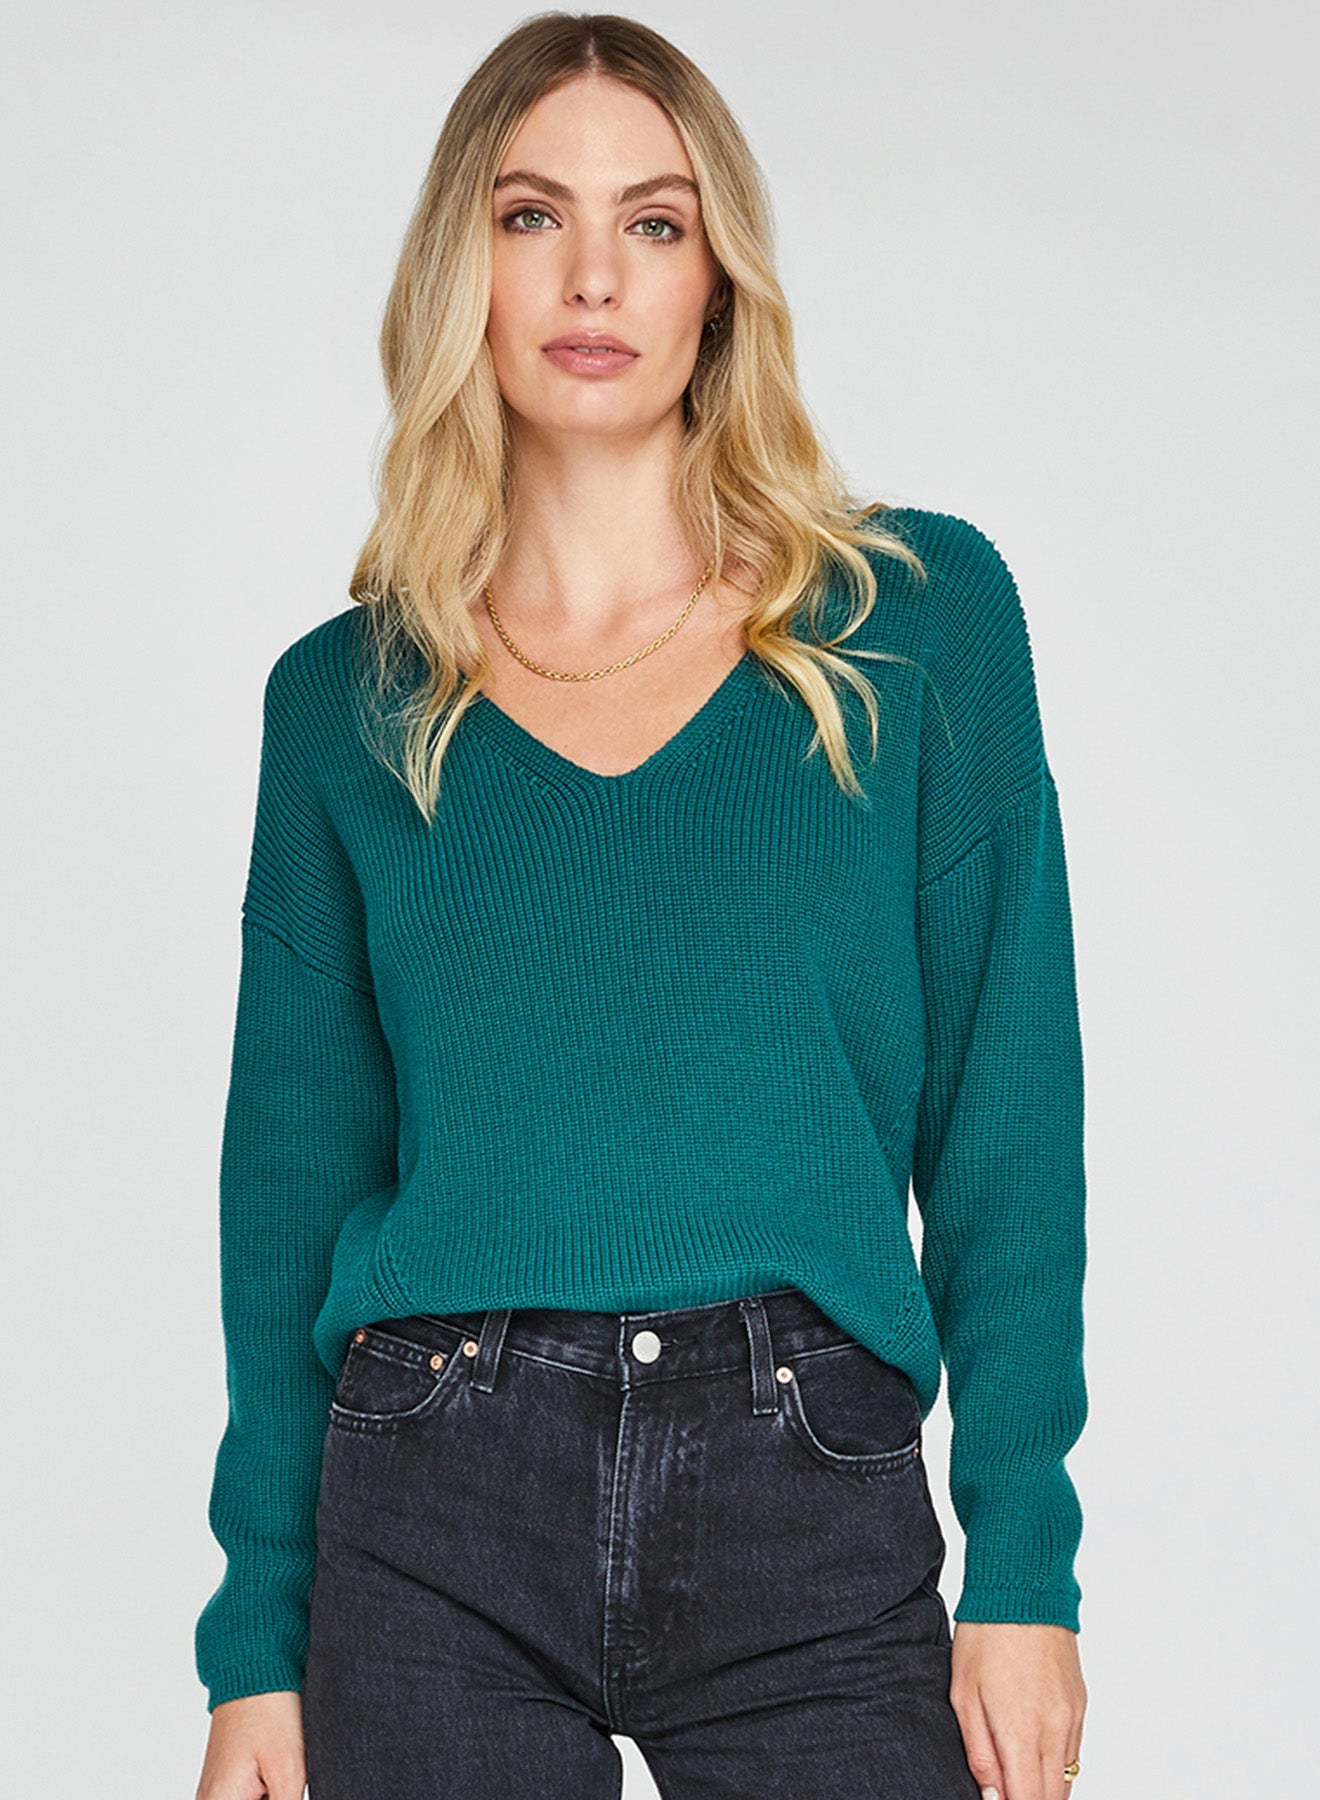 Woman wearing an emerald green sweater for holiday.